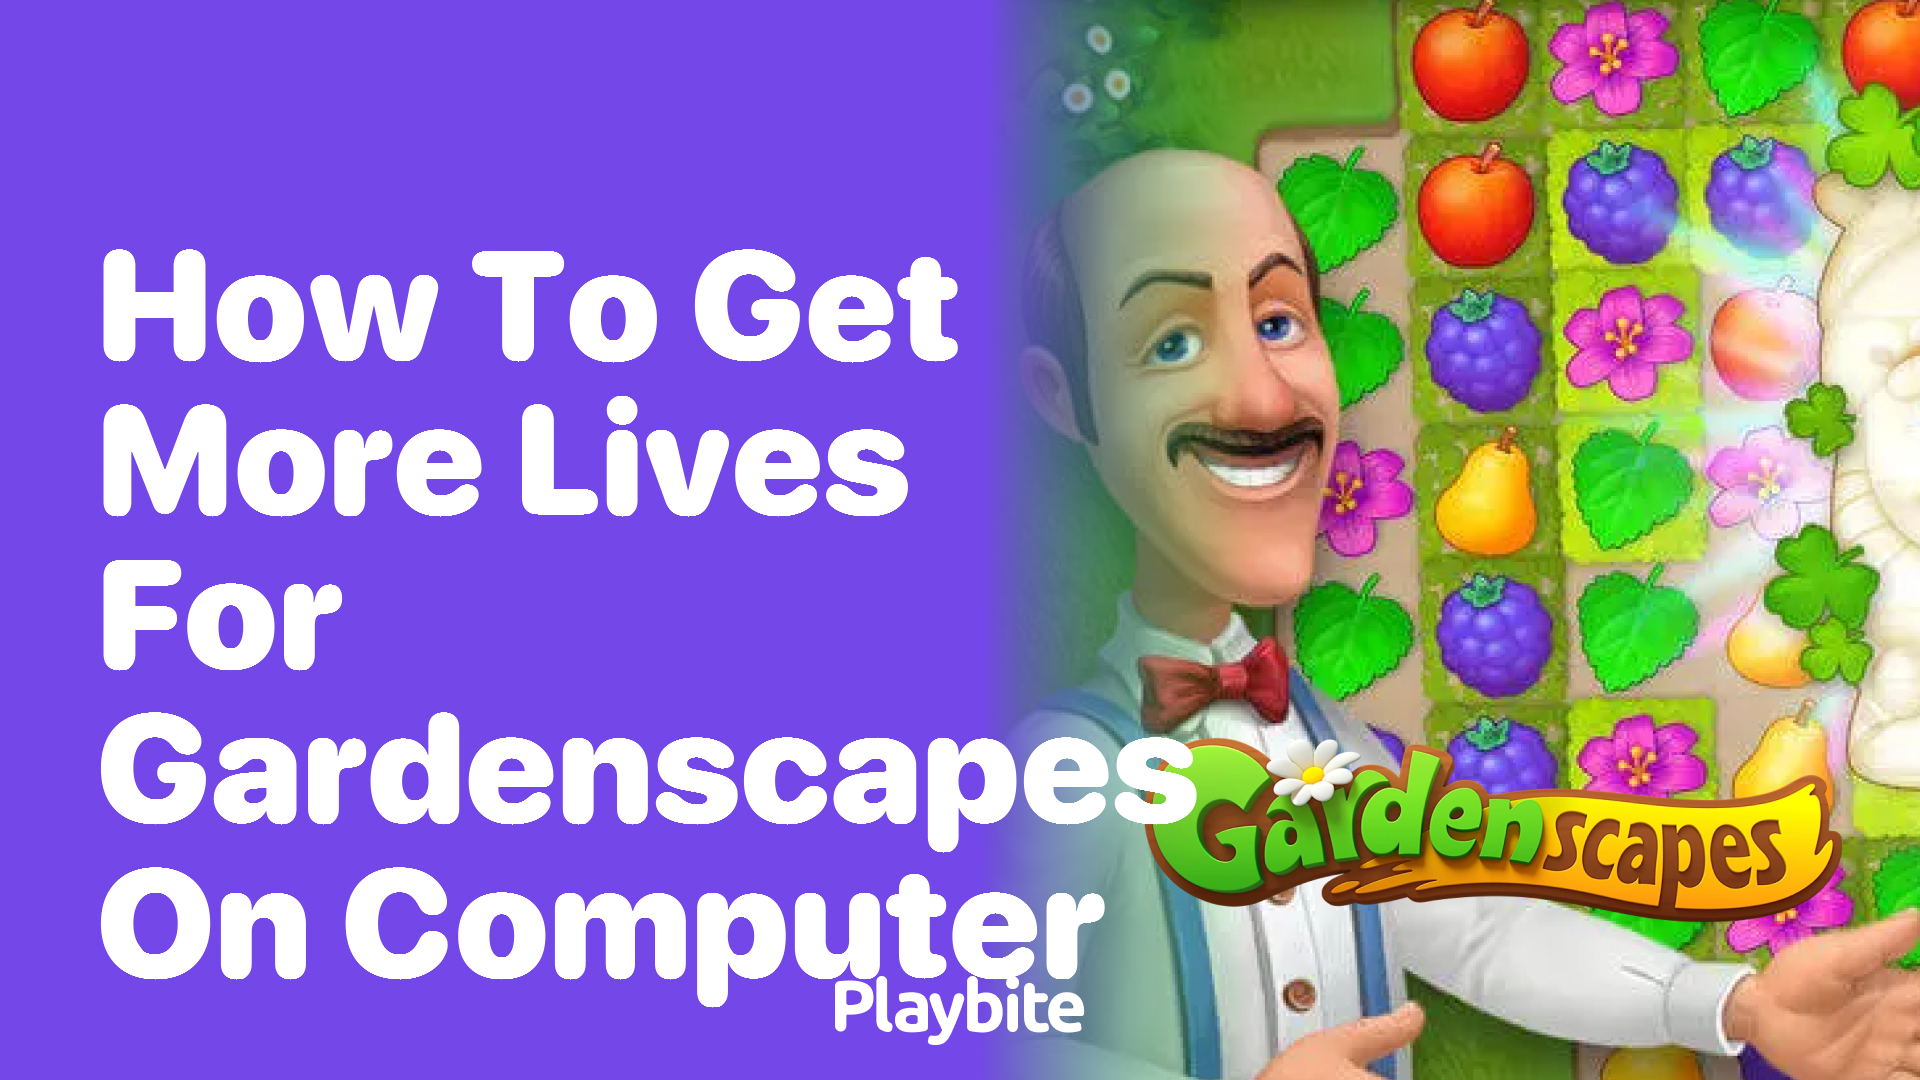 How to Get More Lives for Gardenscapes on Your Computer